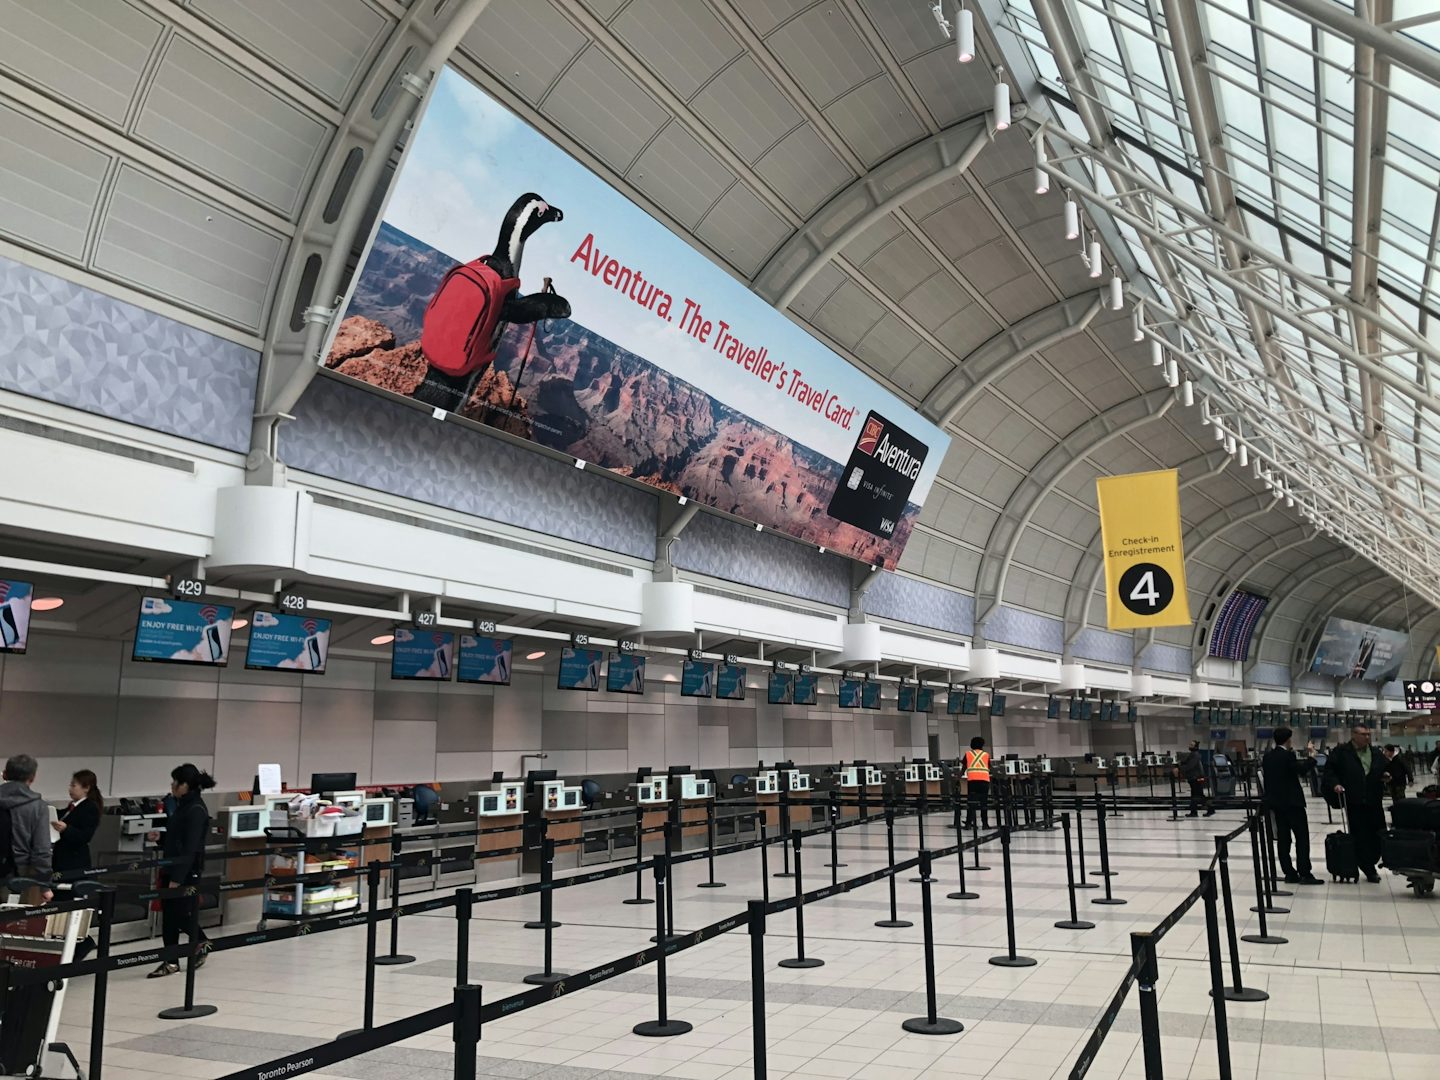 Large format Astral board featuring a CIBC ad atop check-in at Toronto's Pearson airport